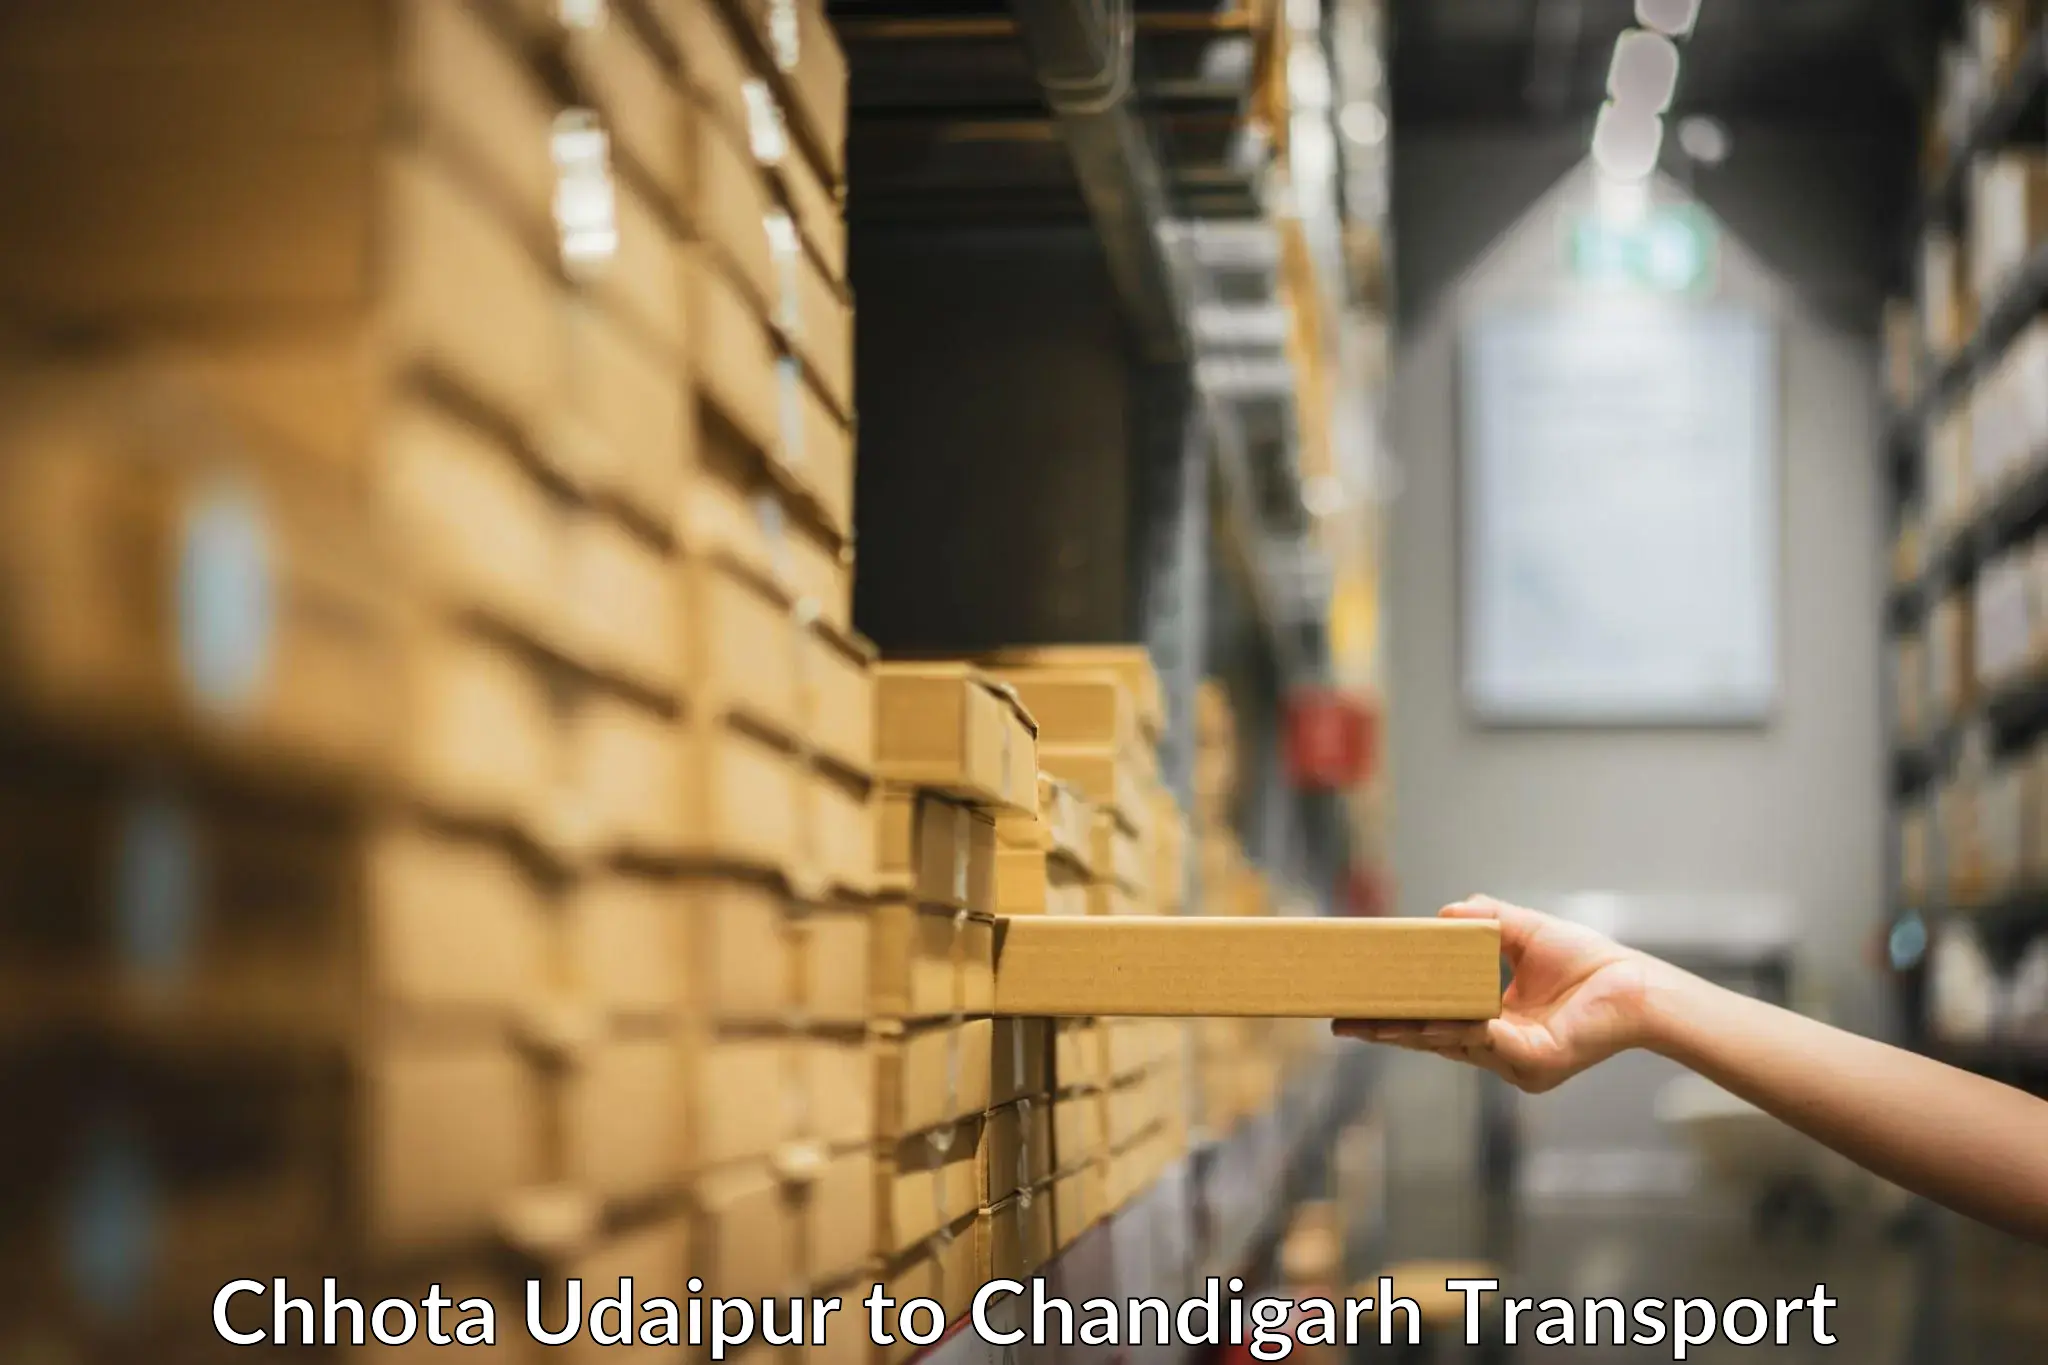 Container transportation services Chhota Udaipur to Chandigarh